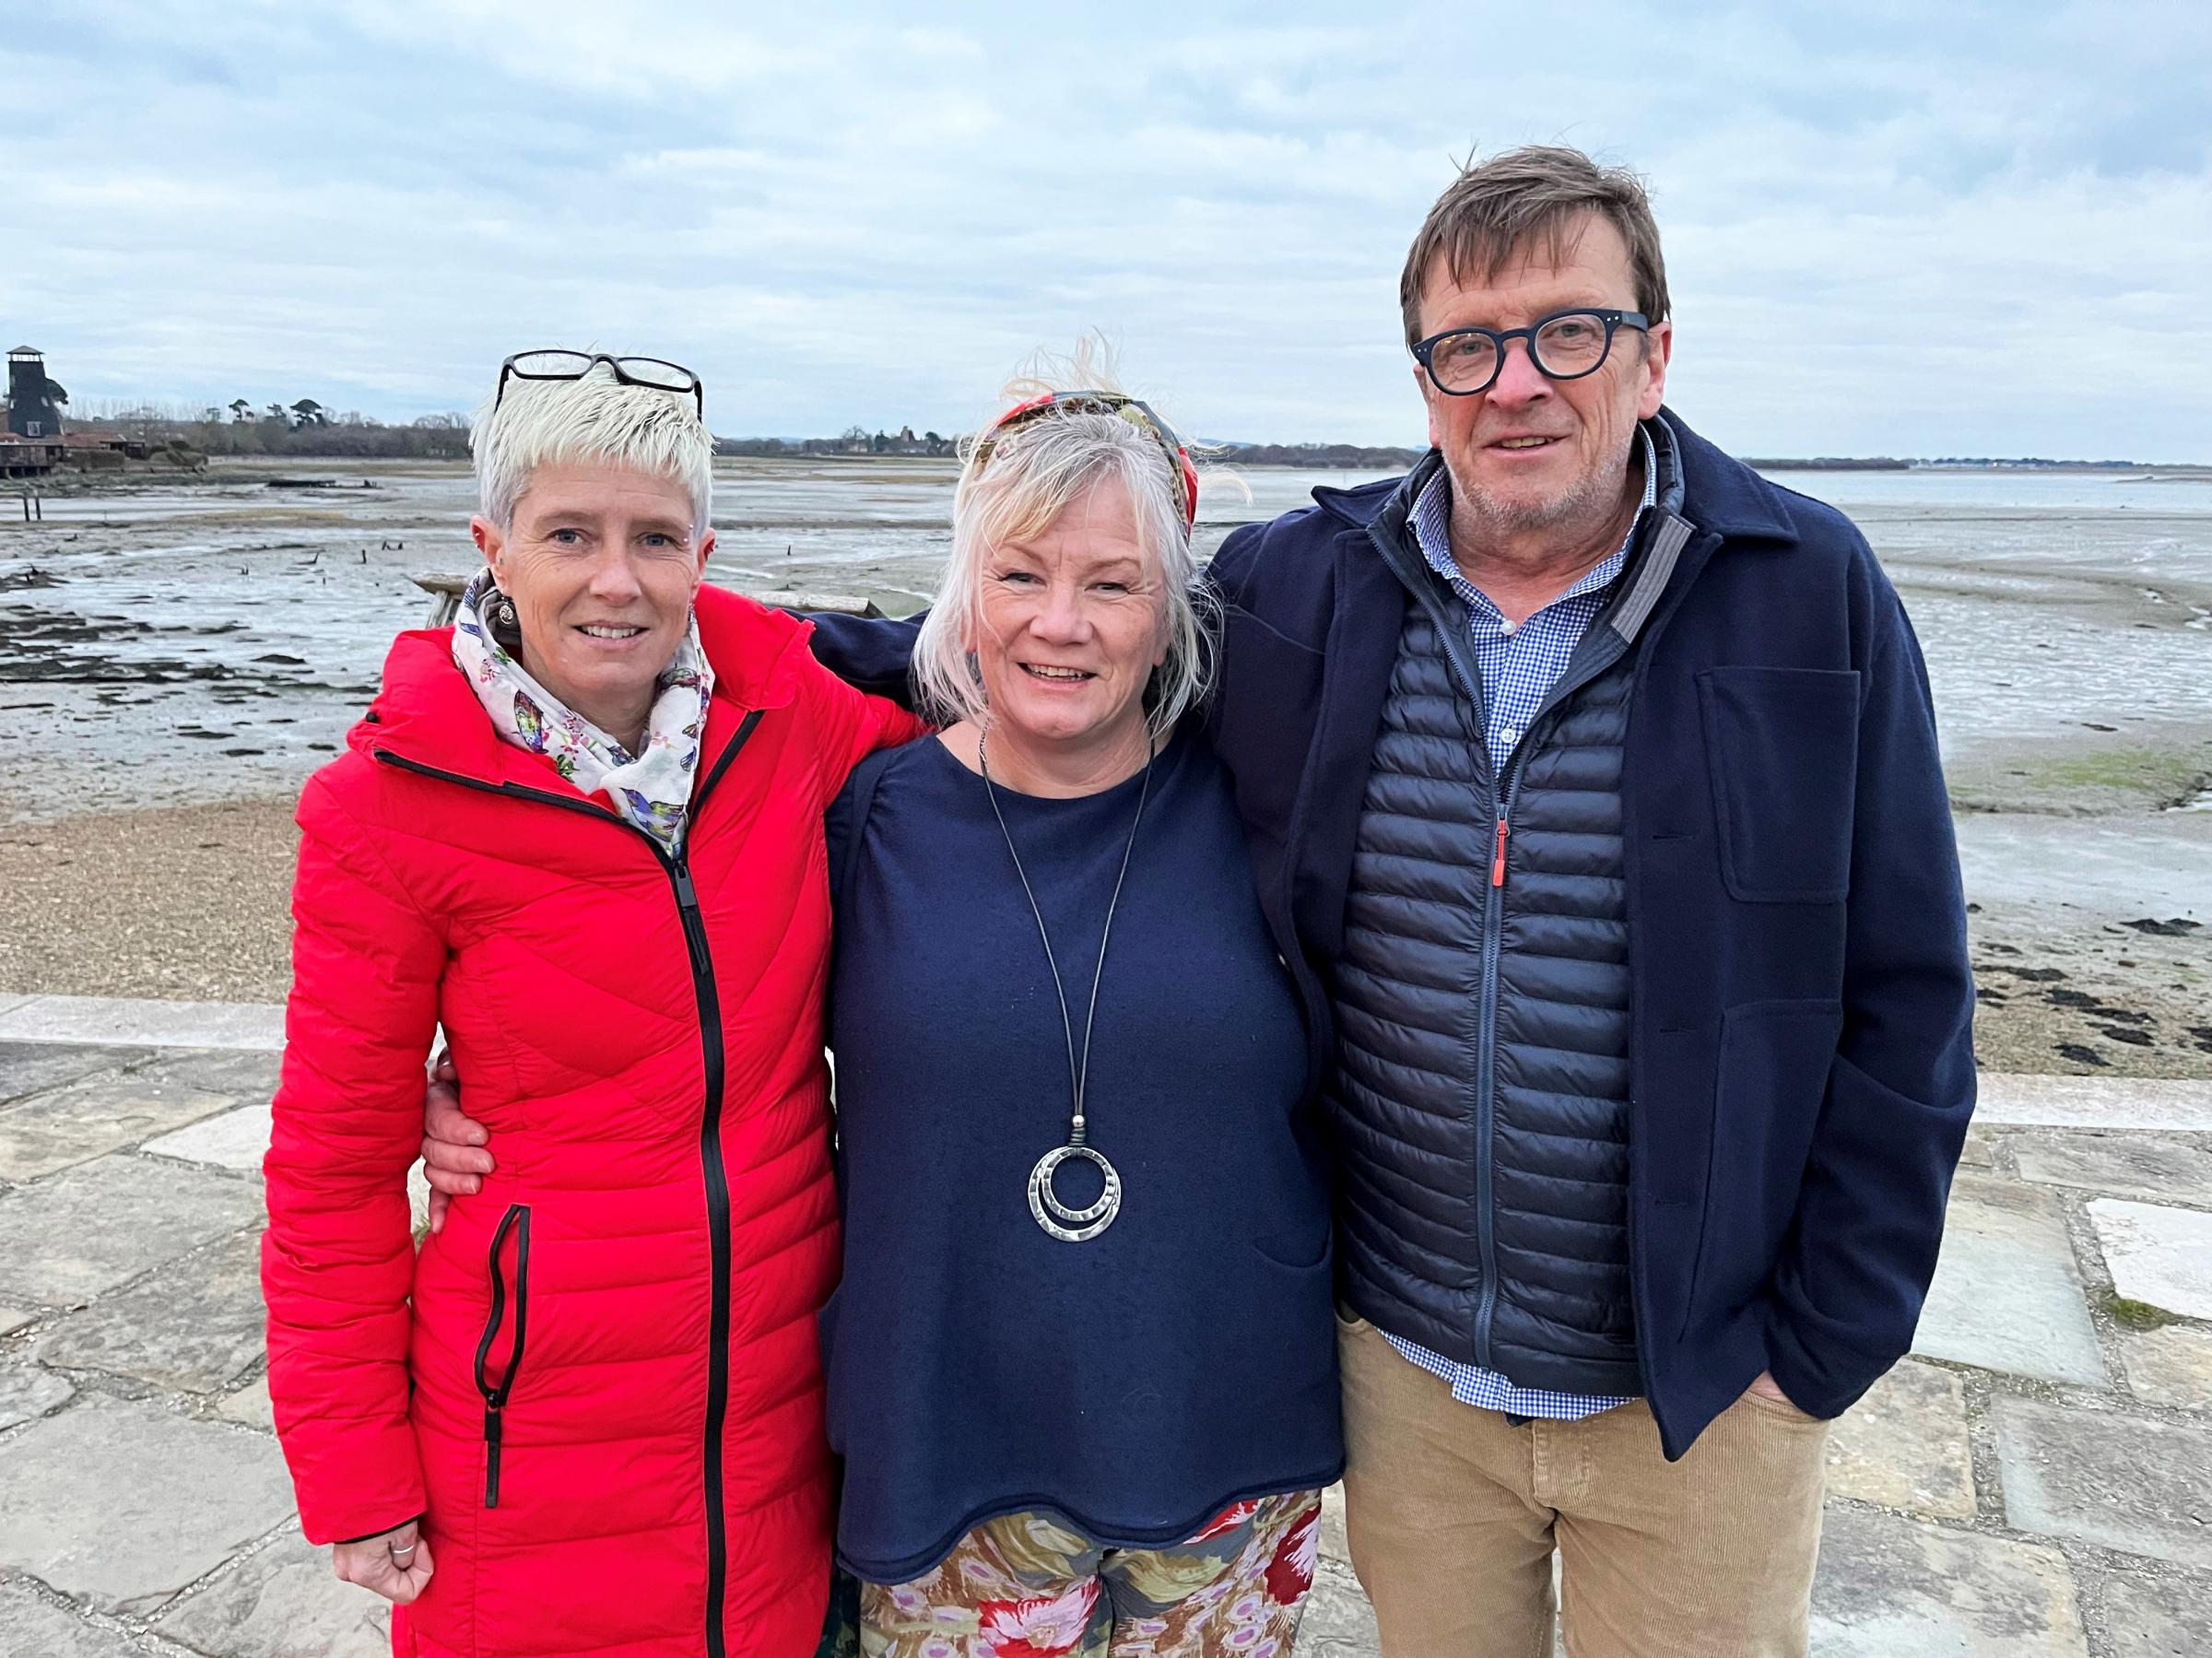  Reunited searcher Sara Hathaway (centre) with her found sister Kerry Sanderson (left) and her found brother Steve Williams (right) Sara, Kerry and Steve are maternal siblings